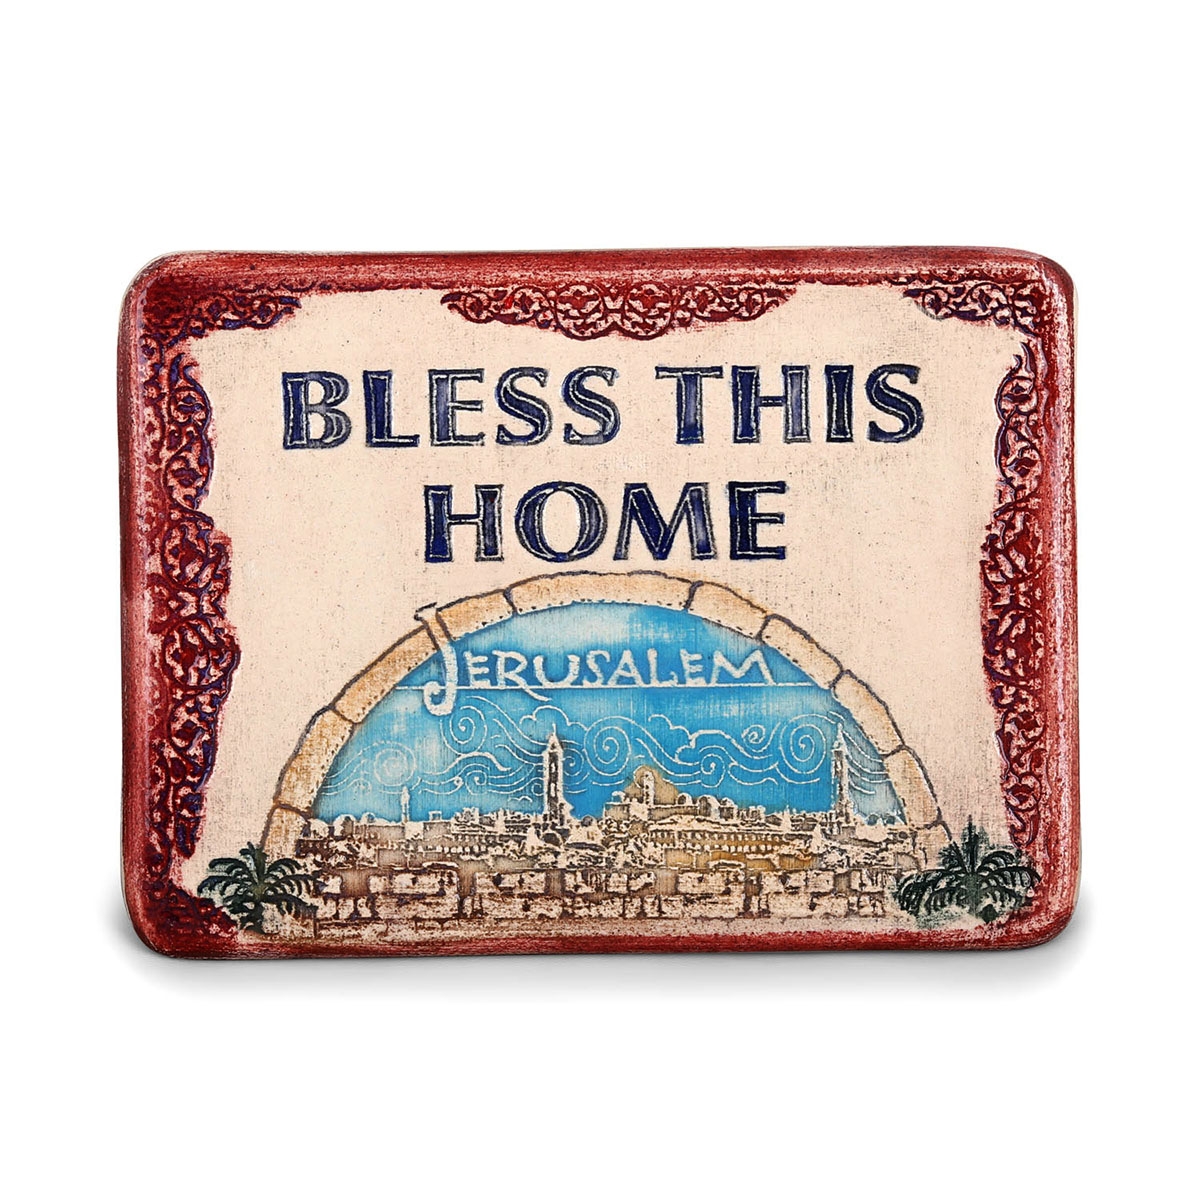 Art In Clay Limited Edition Bless This Home Jerusalem Skyline Ceramic Plaque Wall Hanging - 1